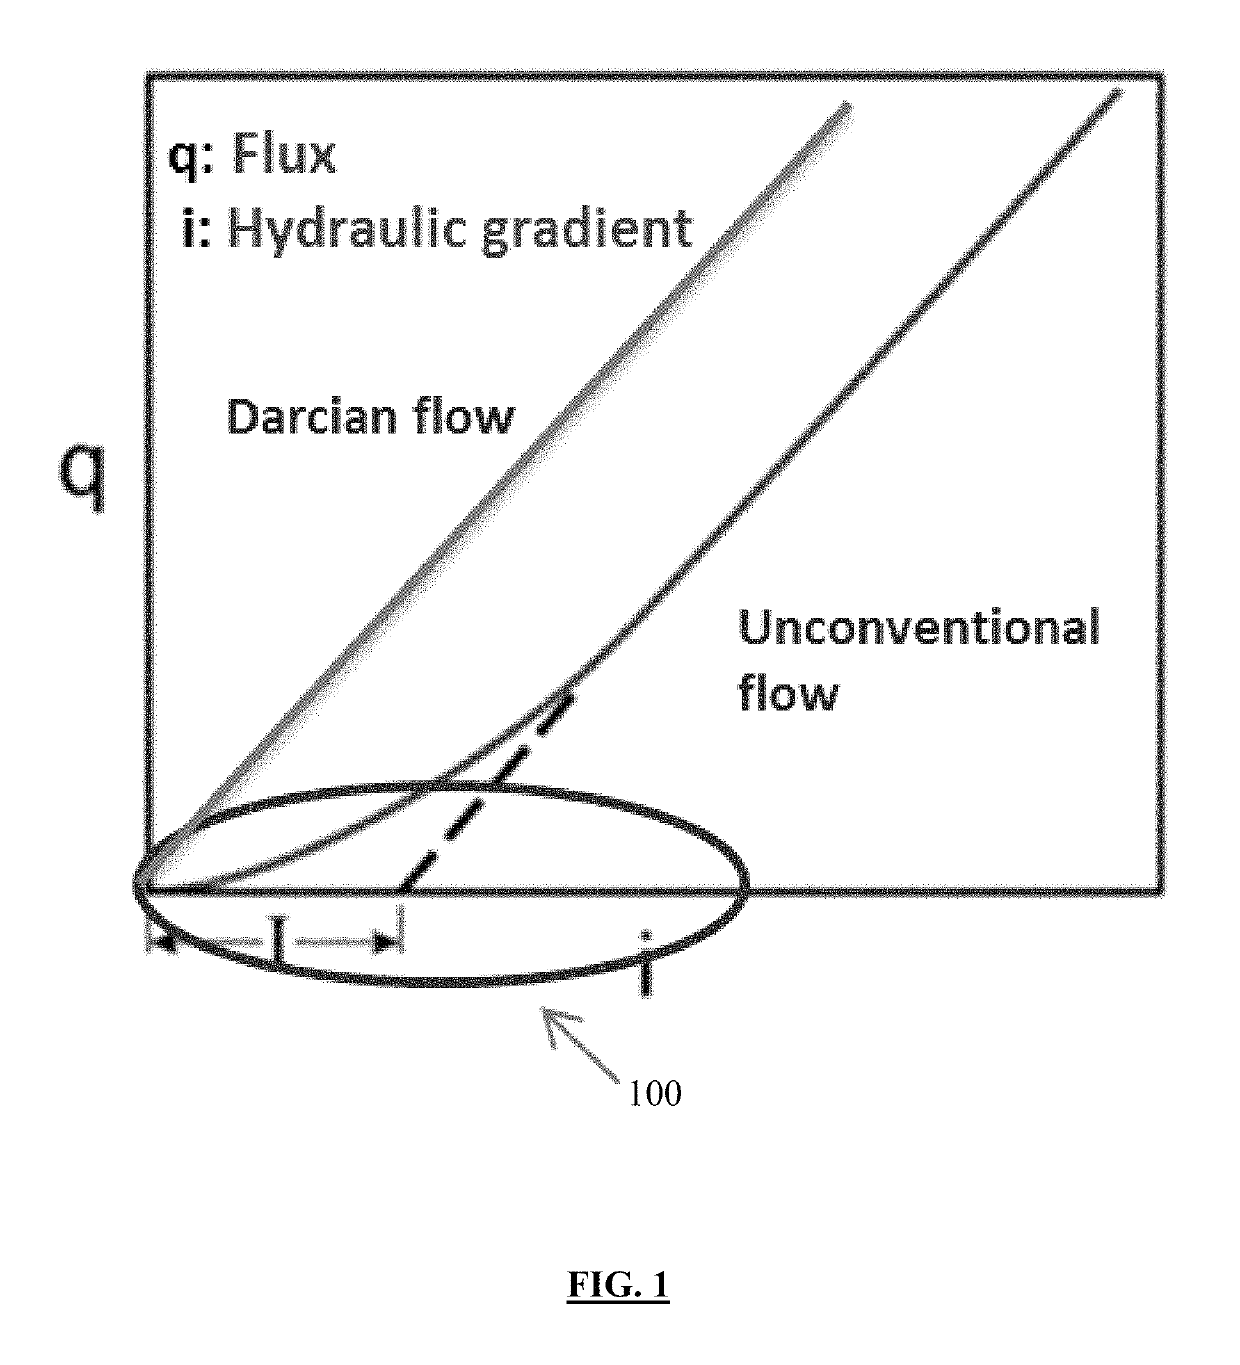 Method for determining unconventional liquid imbibition in low-permeability materials